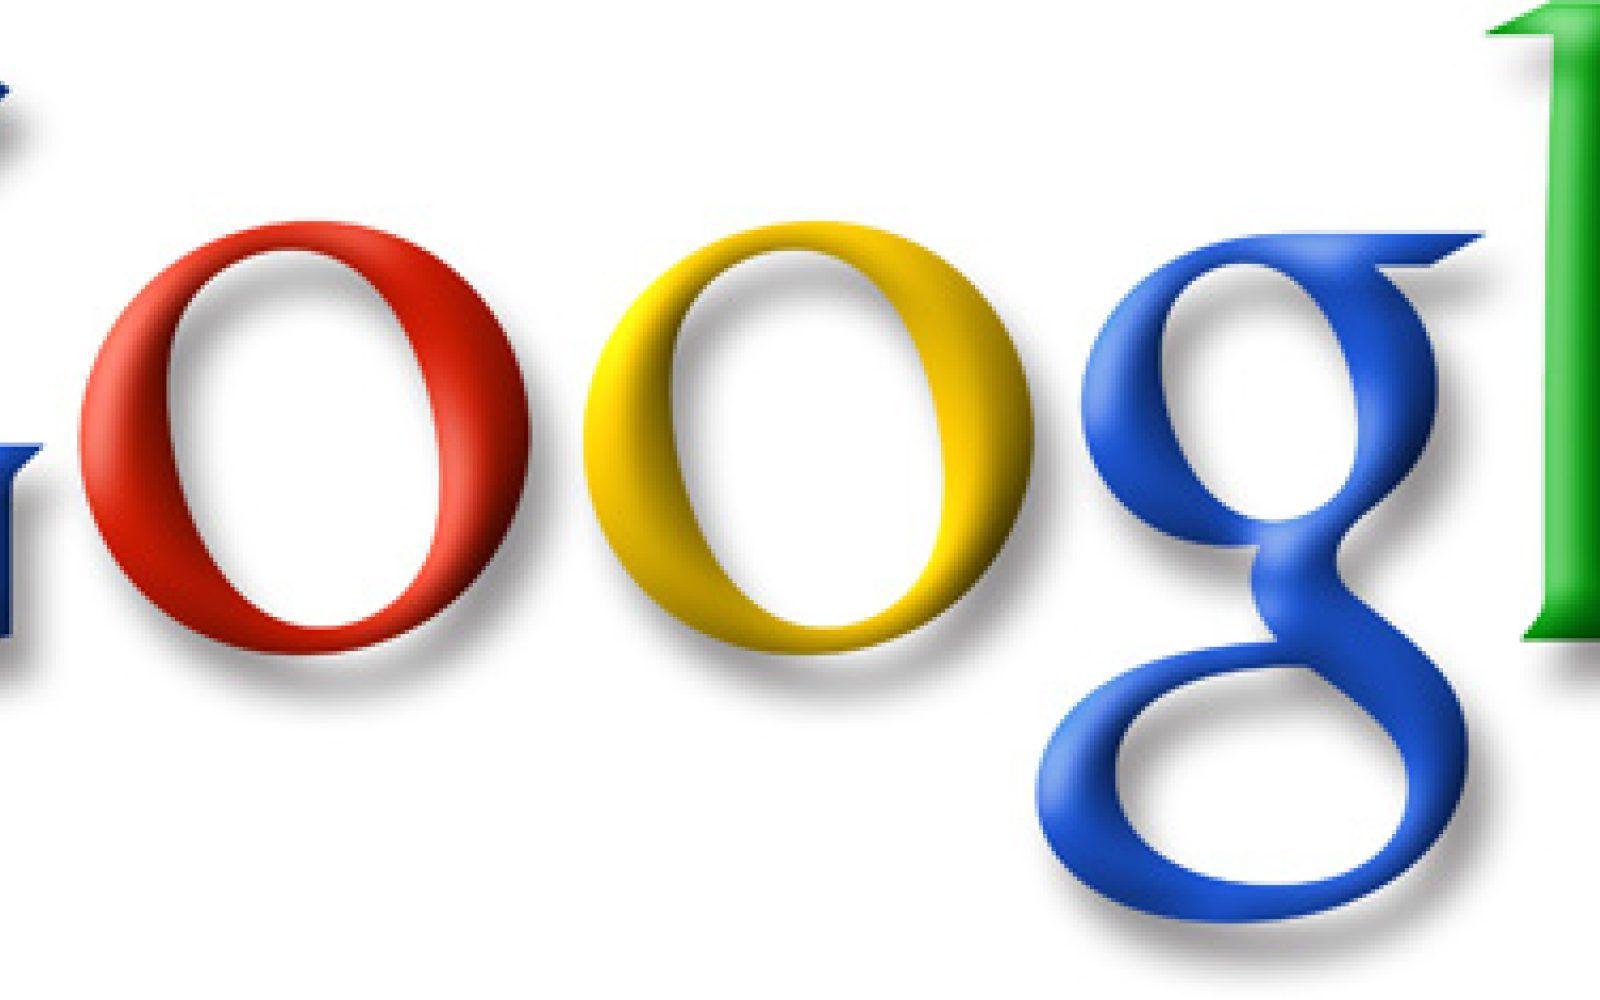 Mess with Google Logo - Google tries to buy its way out of patent mess